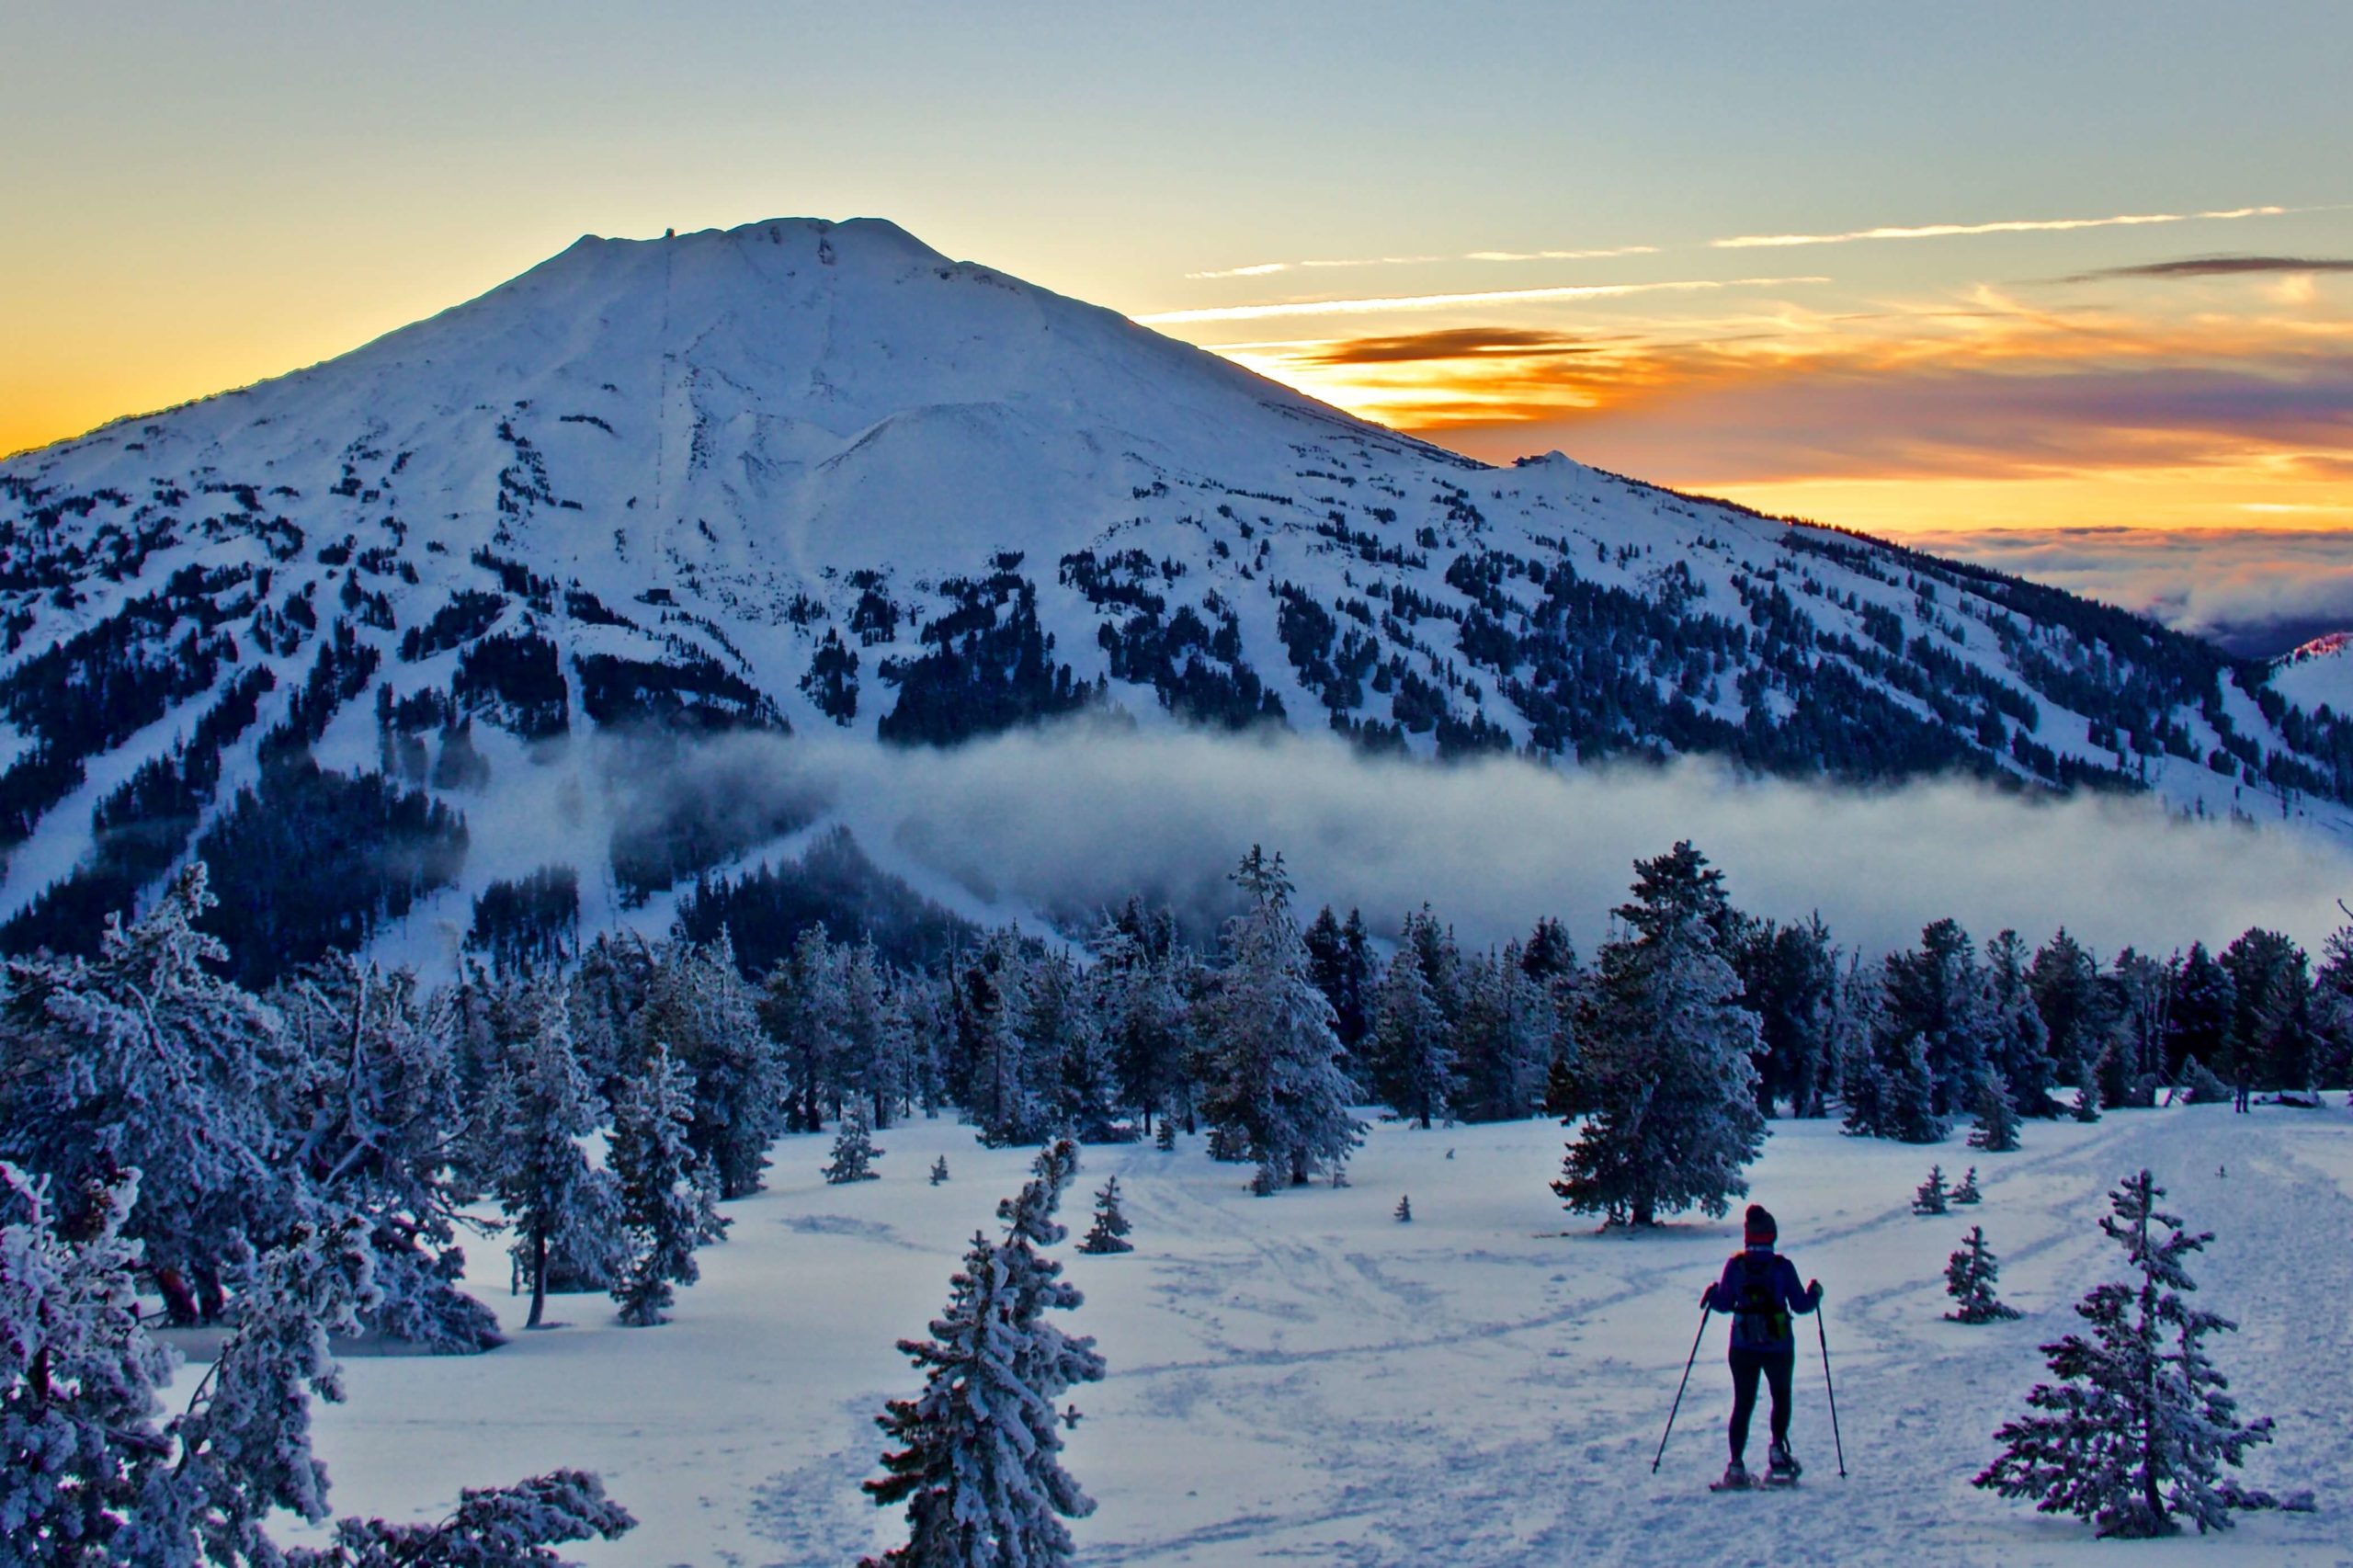 Find Lodging Near Mt. Bachelor With Hot Tubs